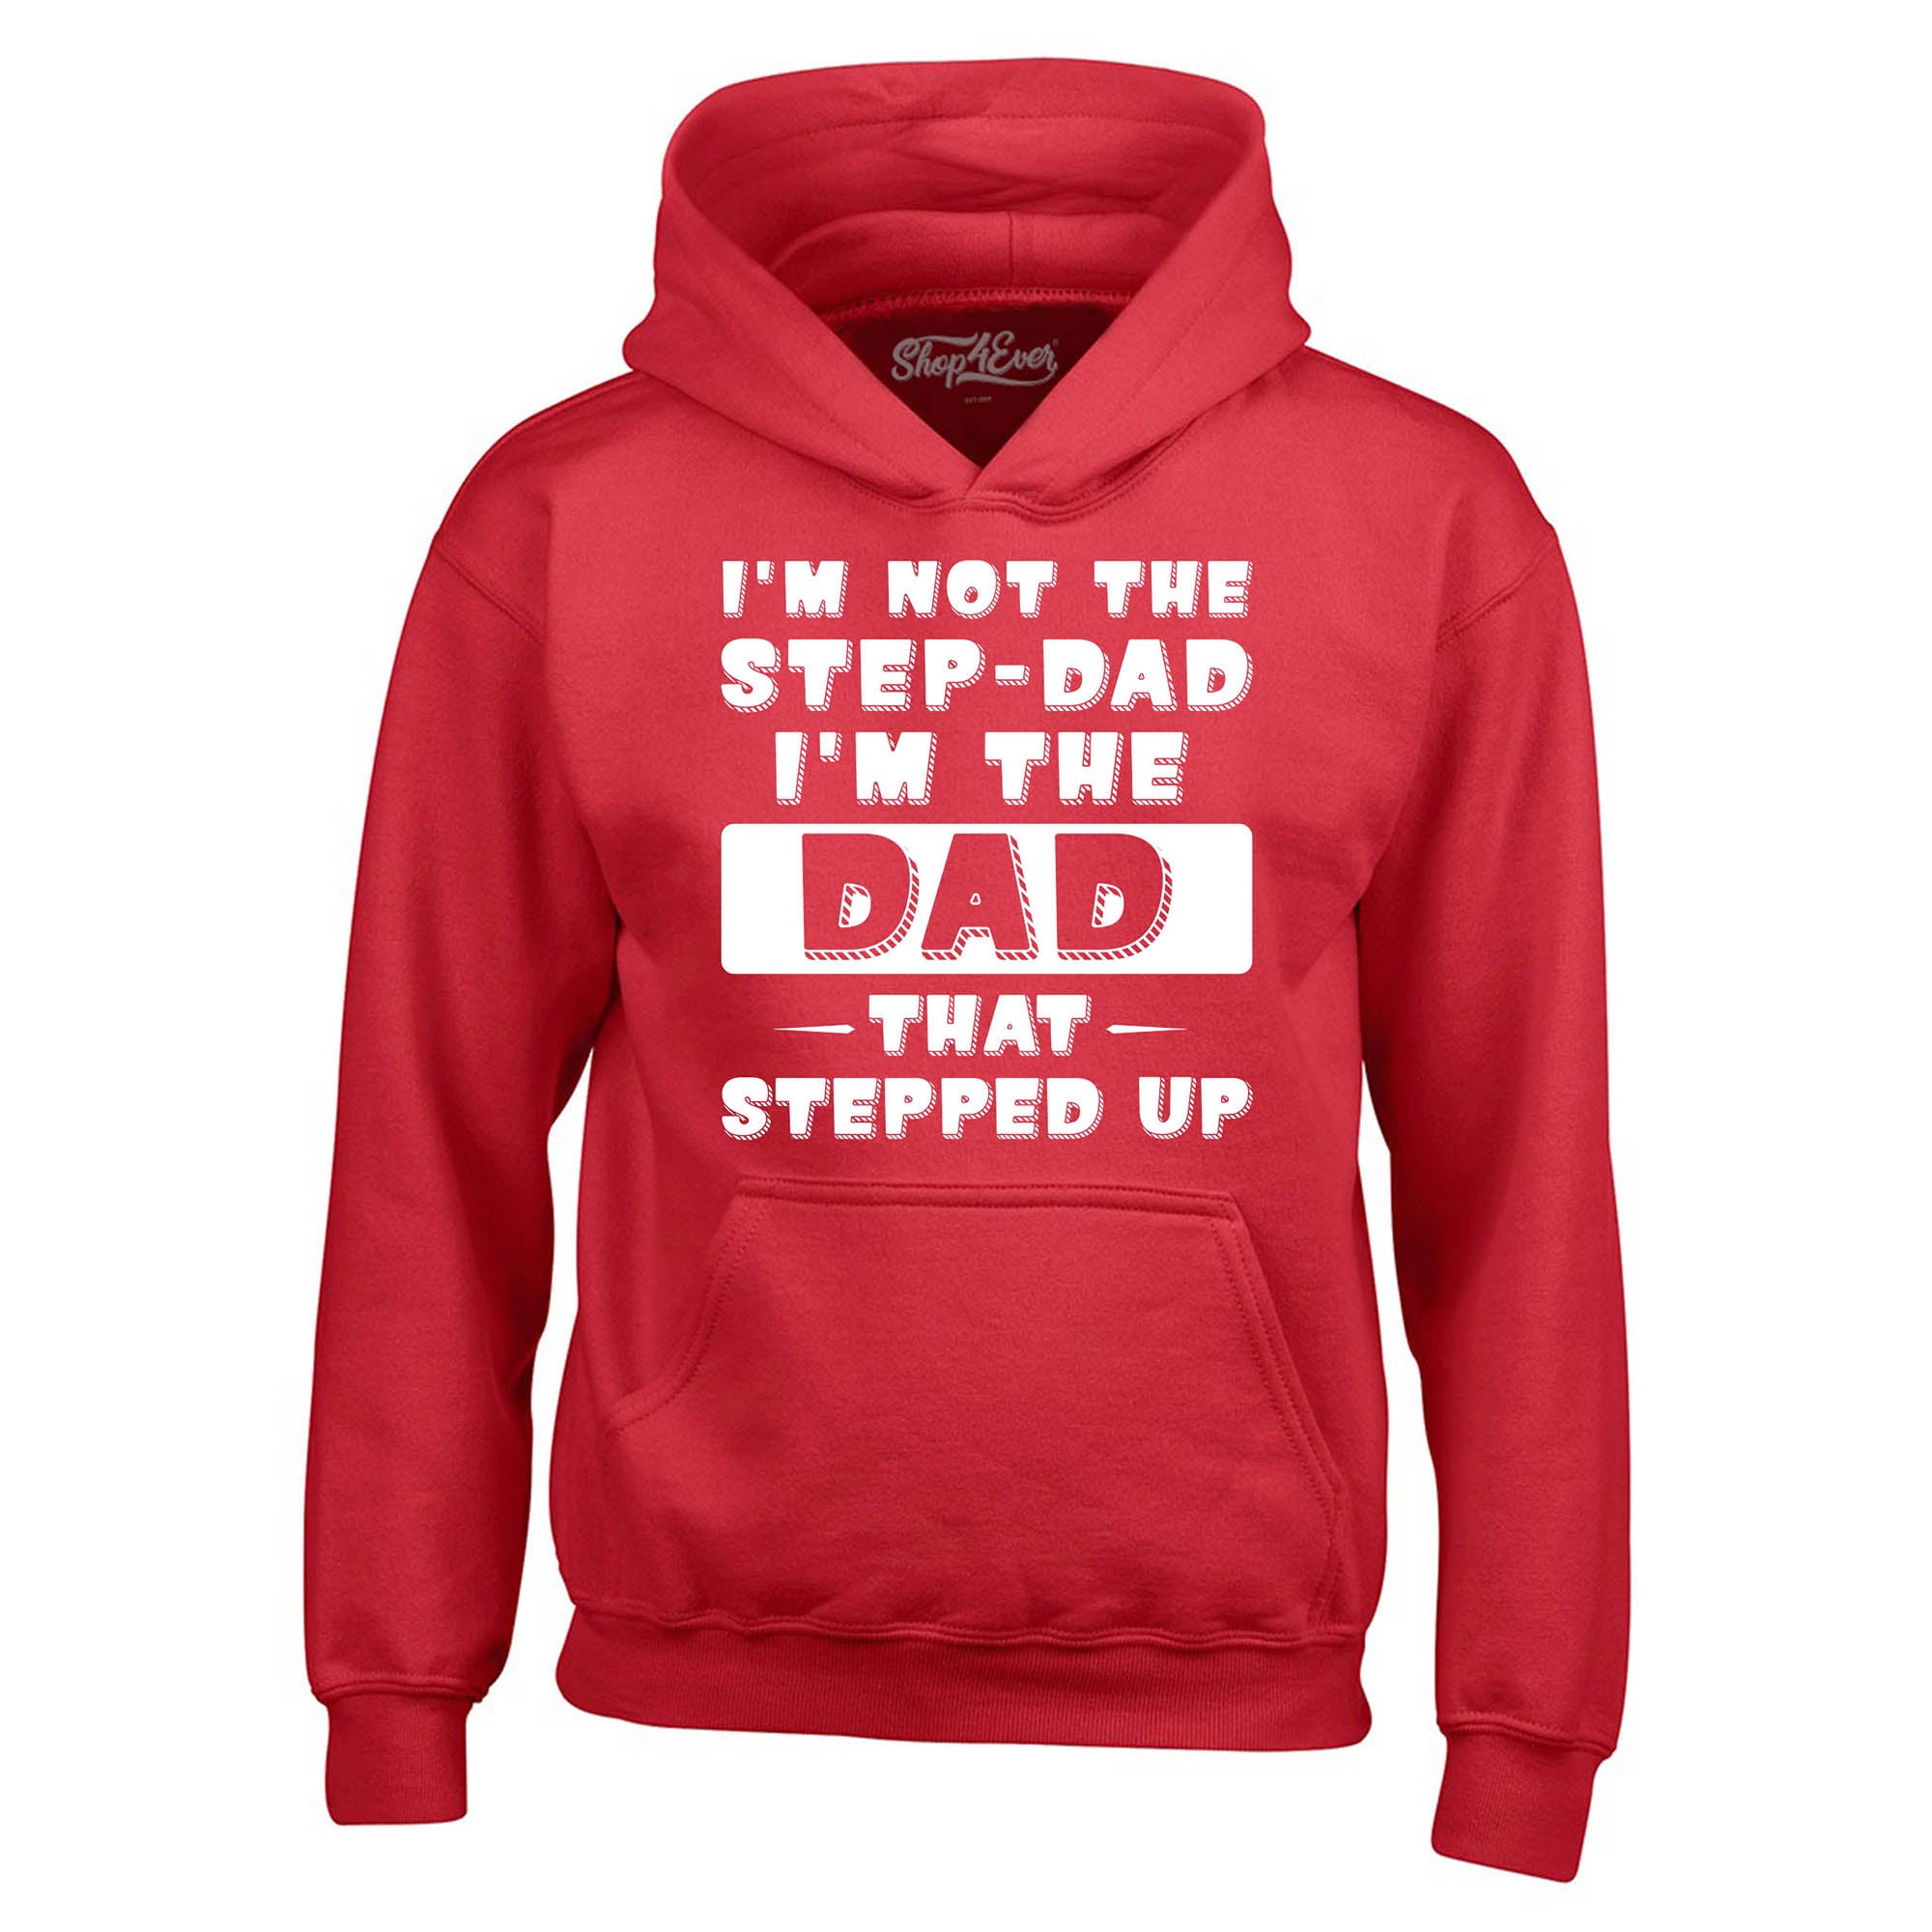 I'm Not the Step Dad I'm the Dad that Stepped Up Hoodie Sweatshirts